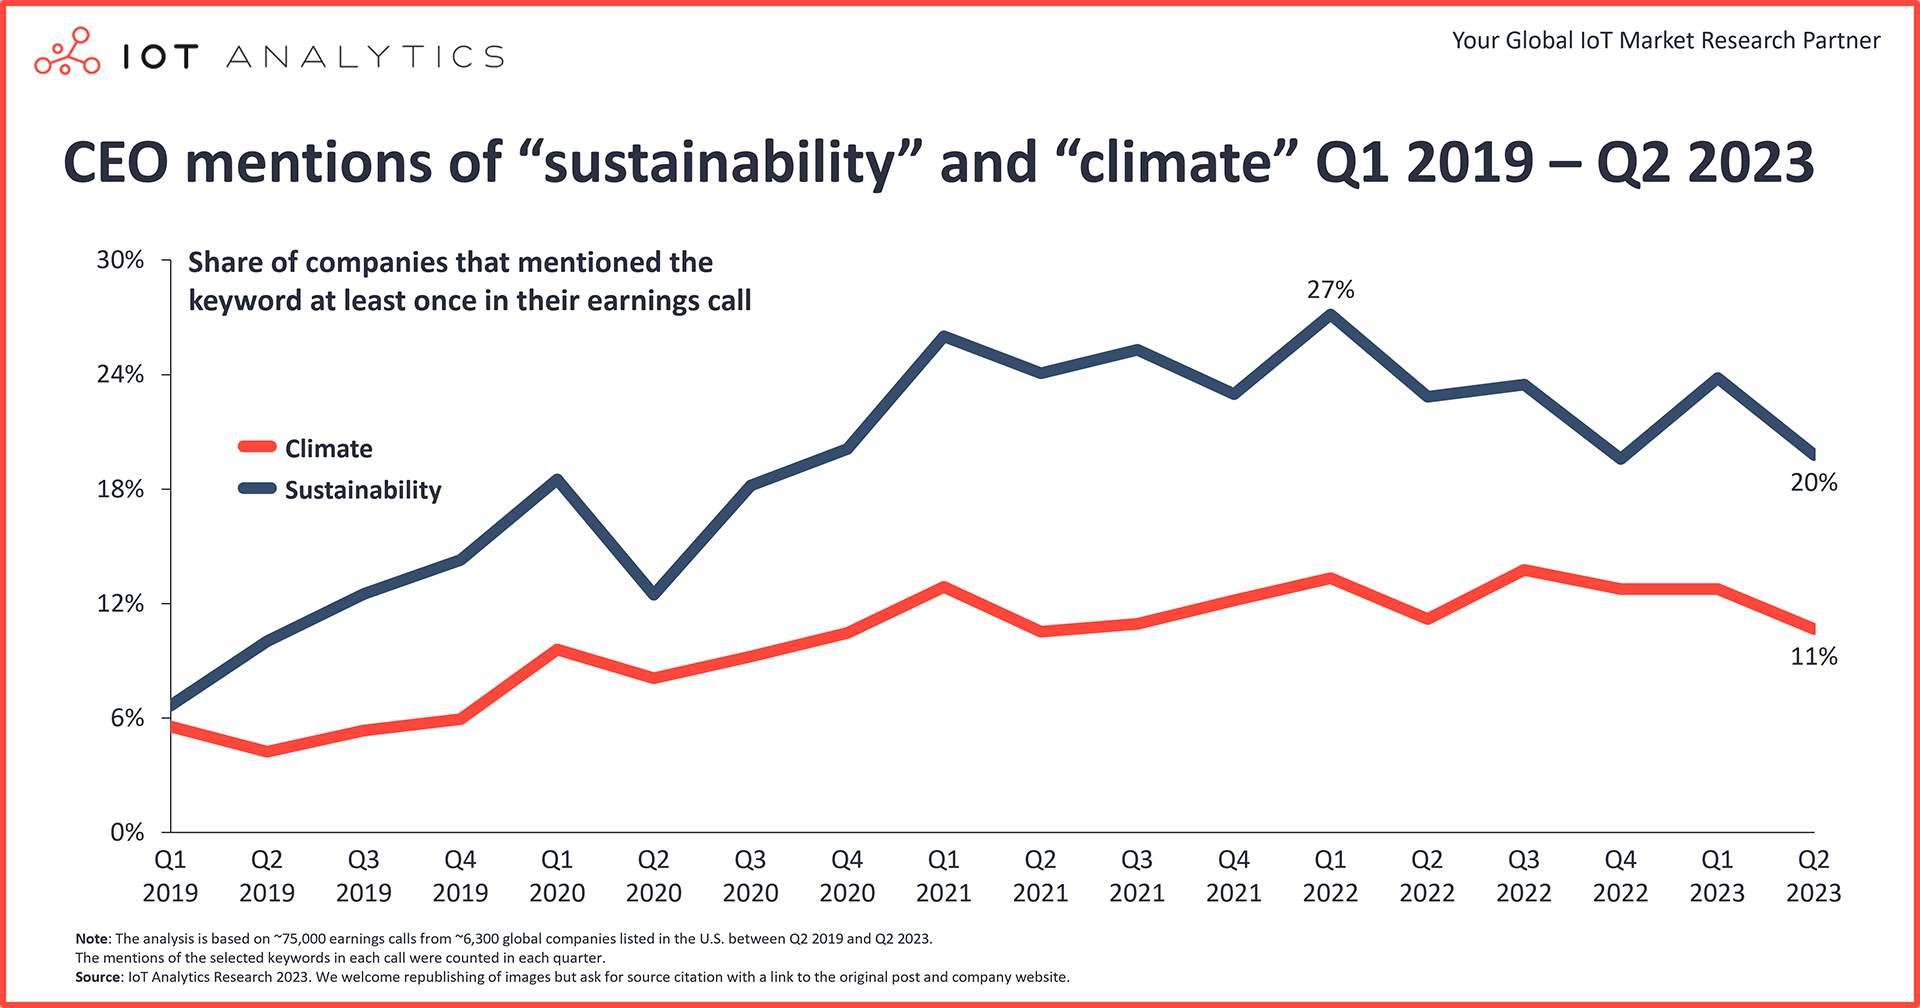 CEO mentions of sustainability and climate Q1 2019 to Q2 2023